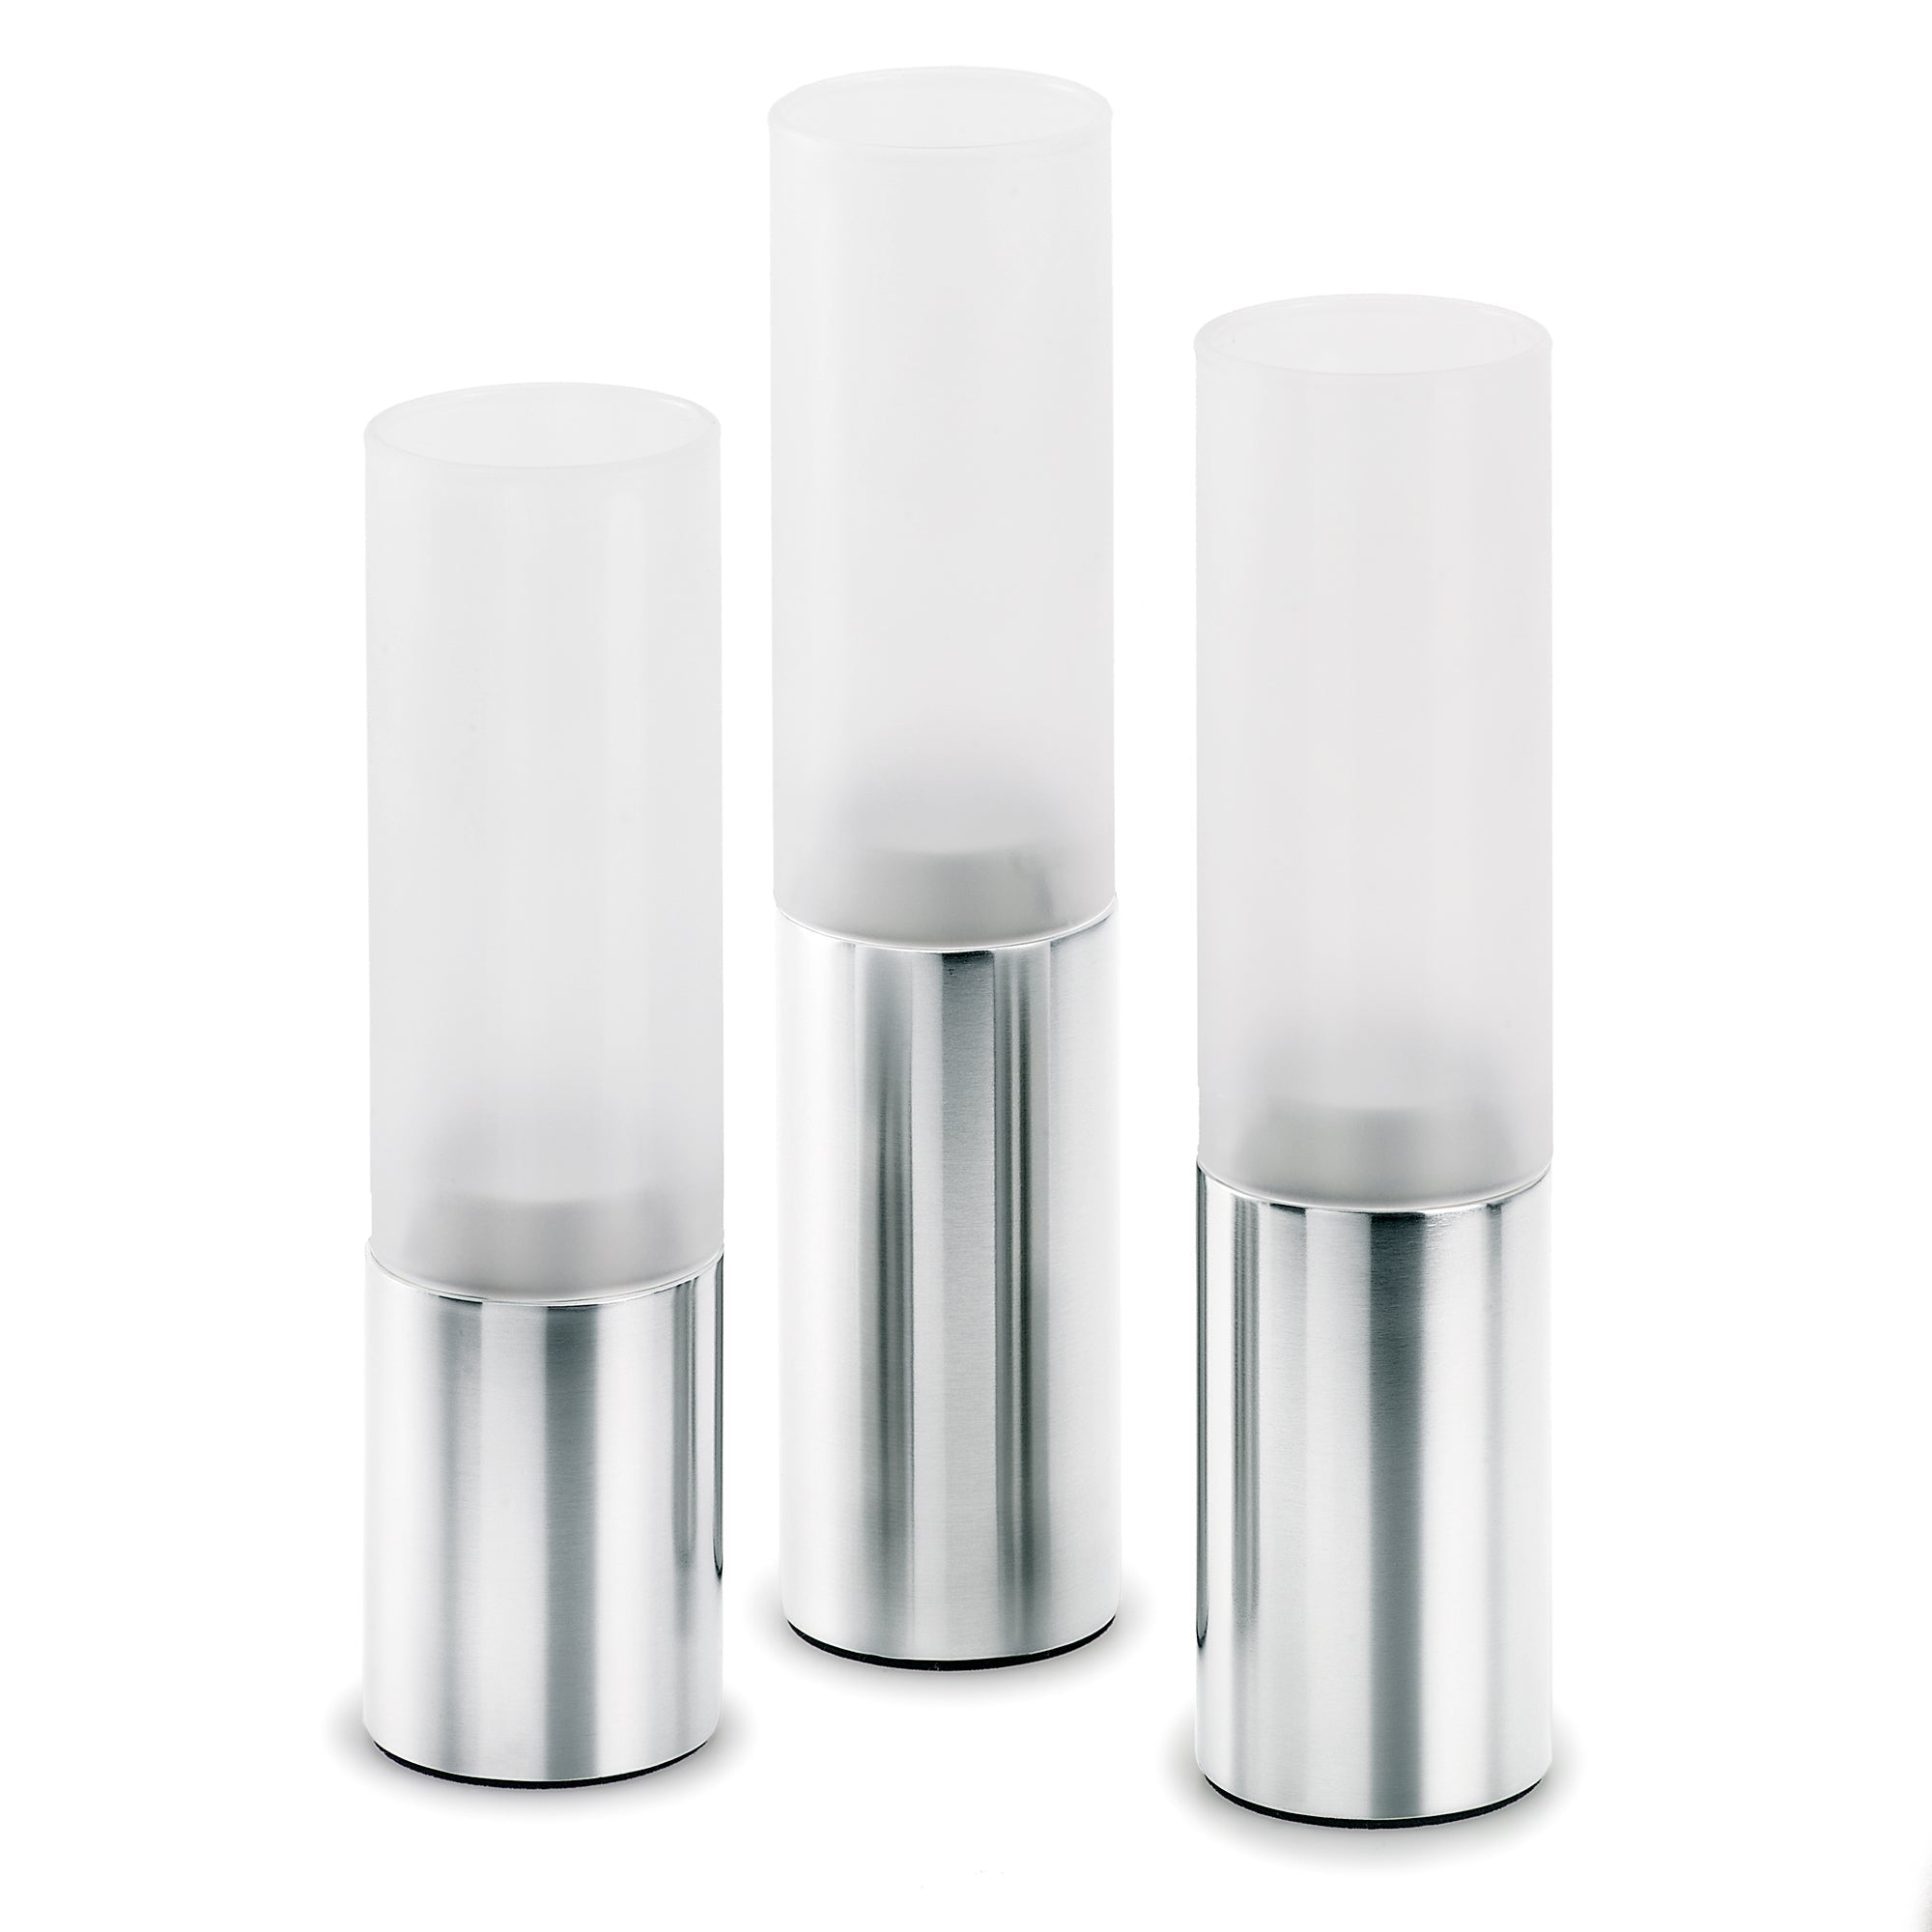 Blomus Tealight Holders: Matt Stainless-Steel with Frosted Glass FARO 3 Pcs